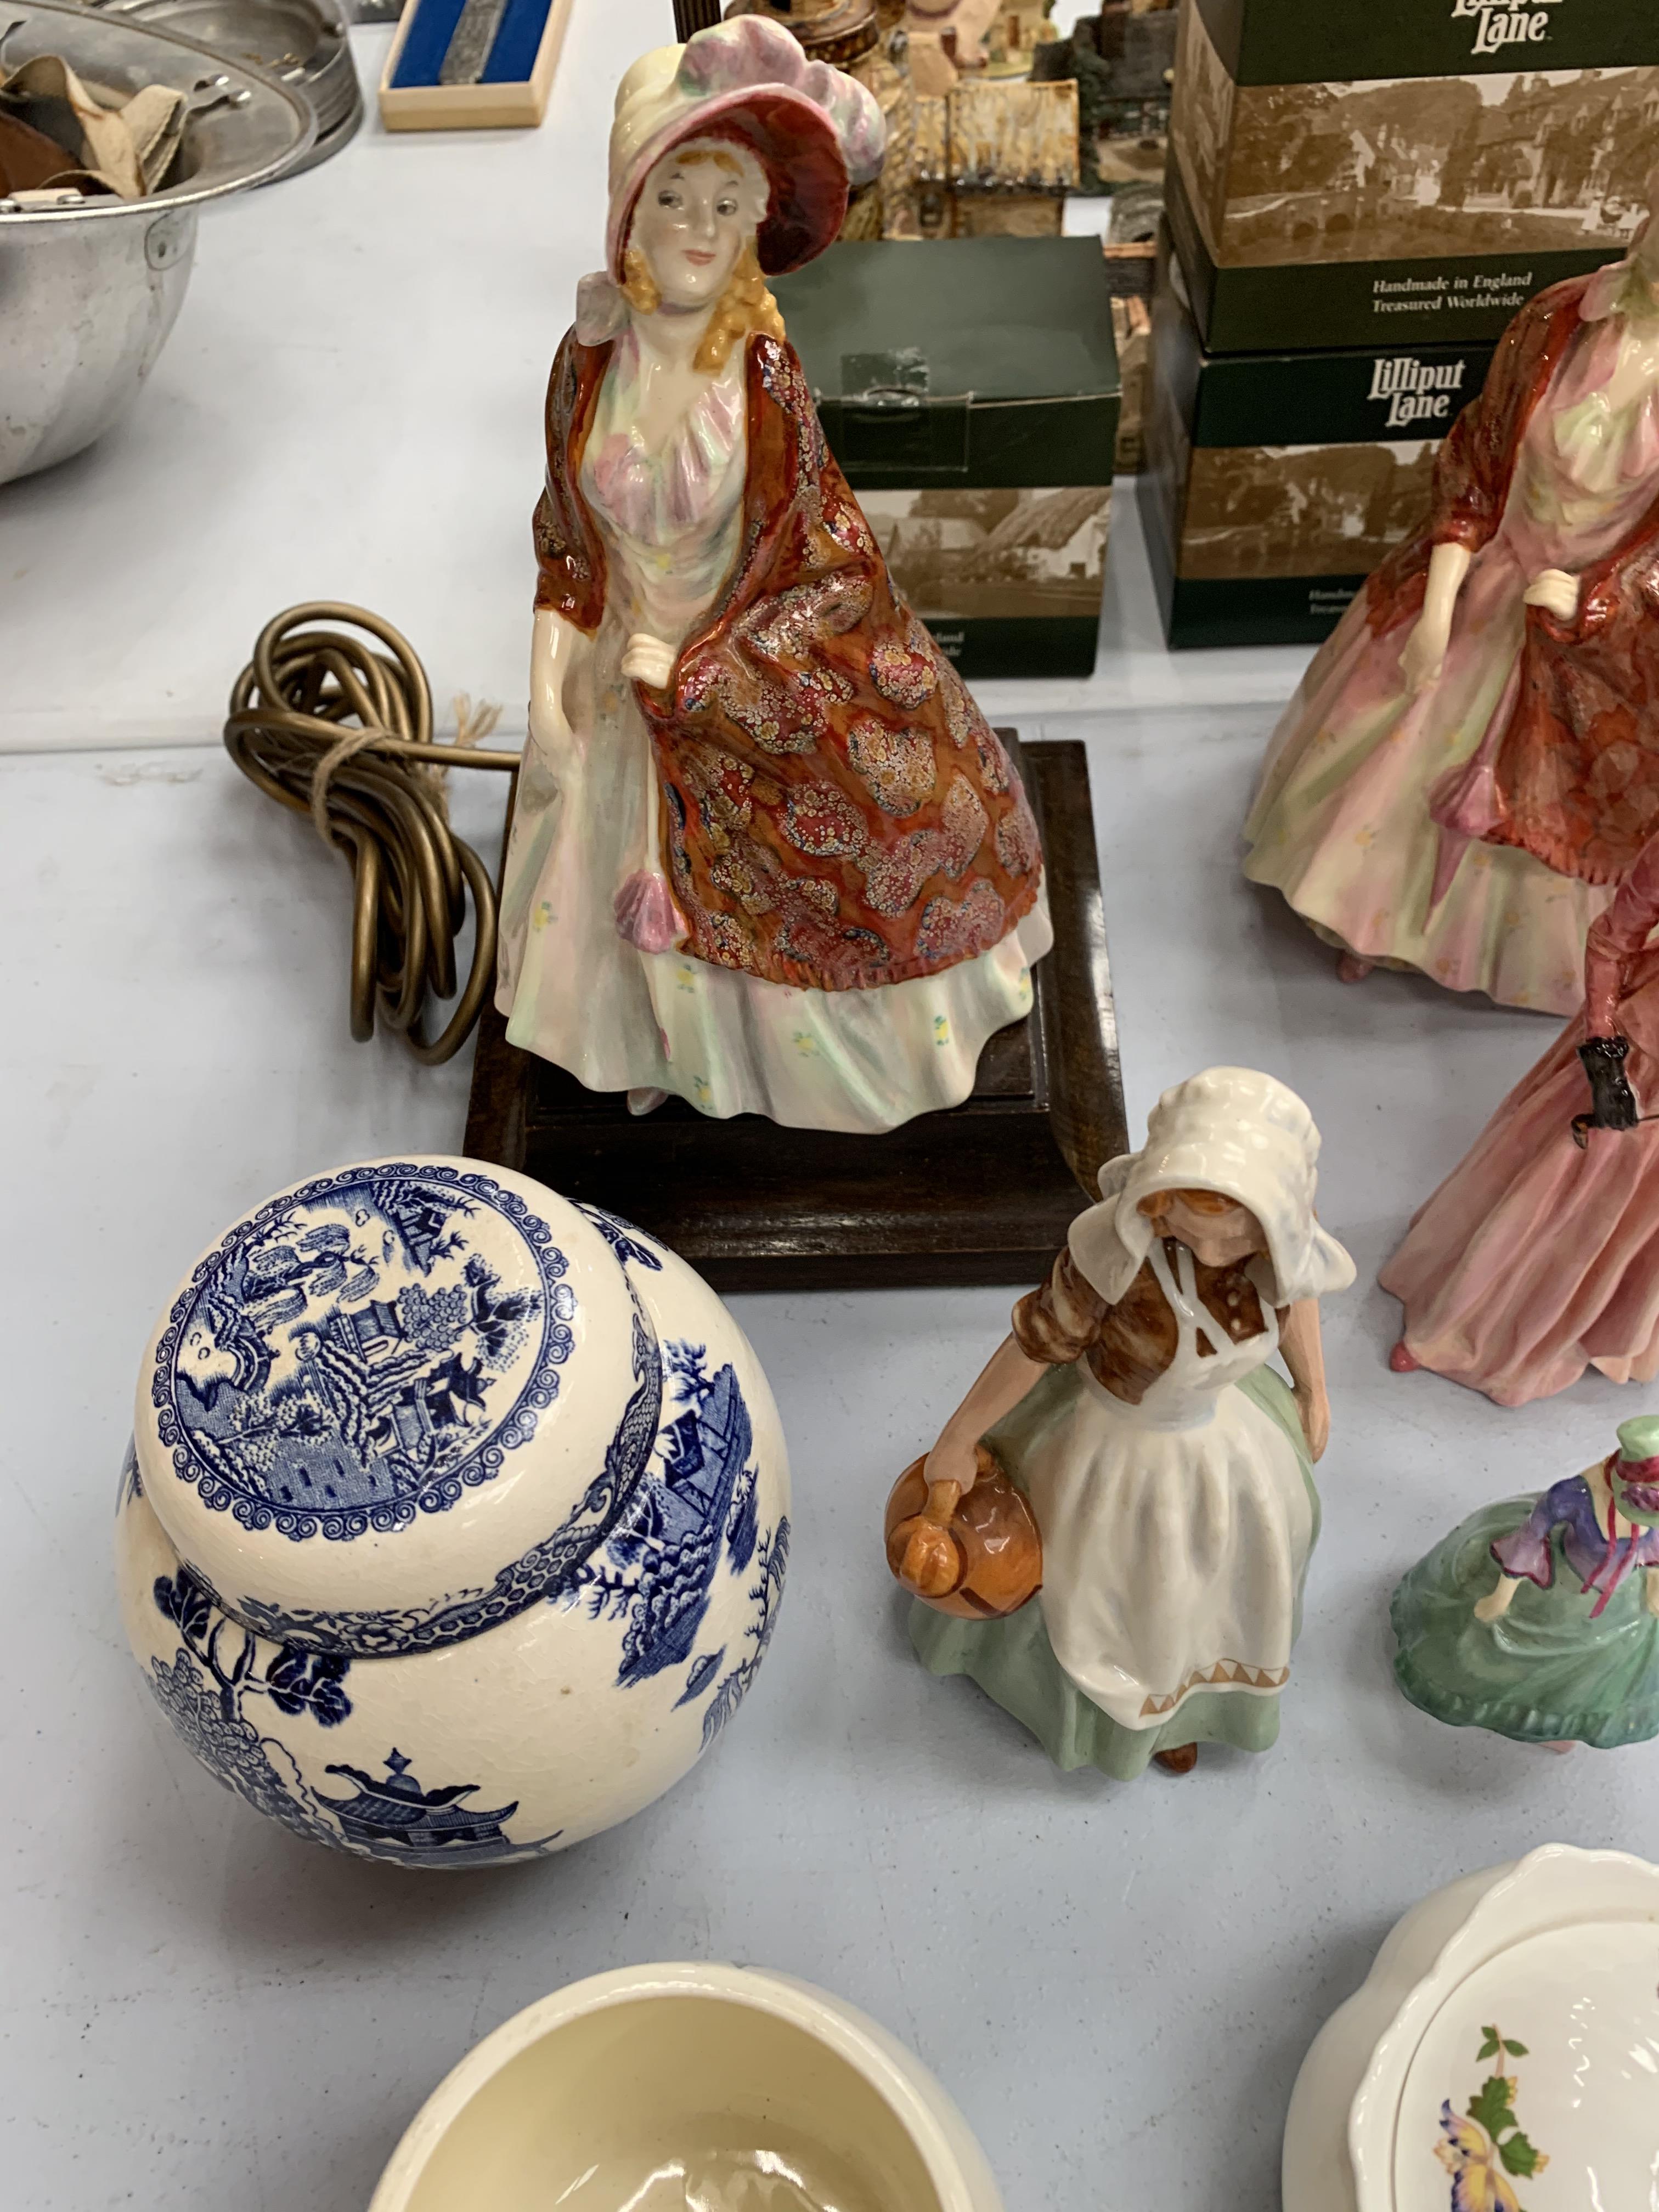 A LARGE COLLECTION OF VARIOUS CERAMIC ITEMS TO INCLUDE FIGURINES, GINGER JAR, PLANTER, DISHES, ETC - Image 4 of 8